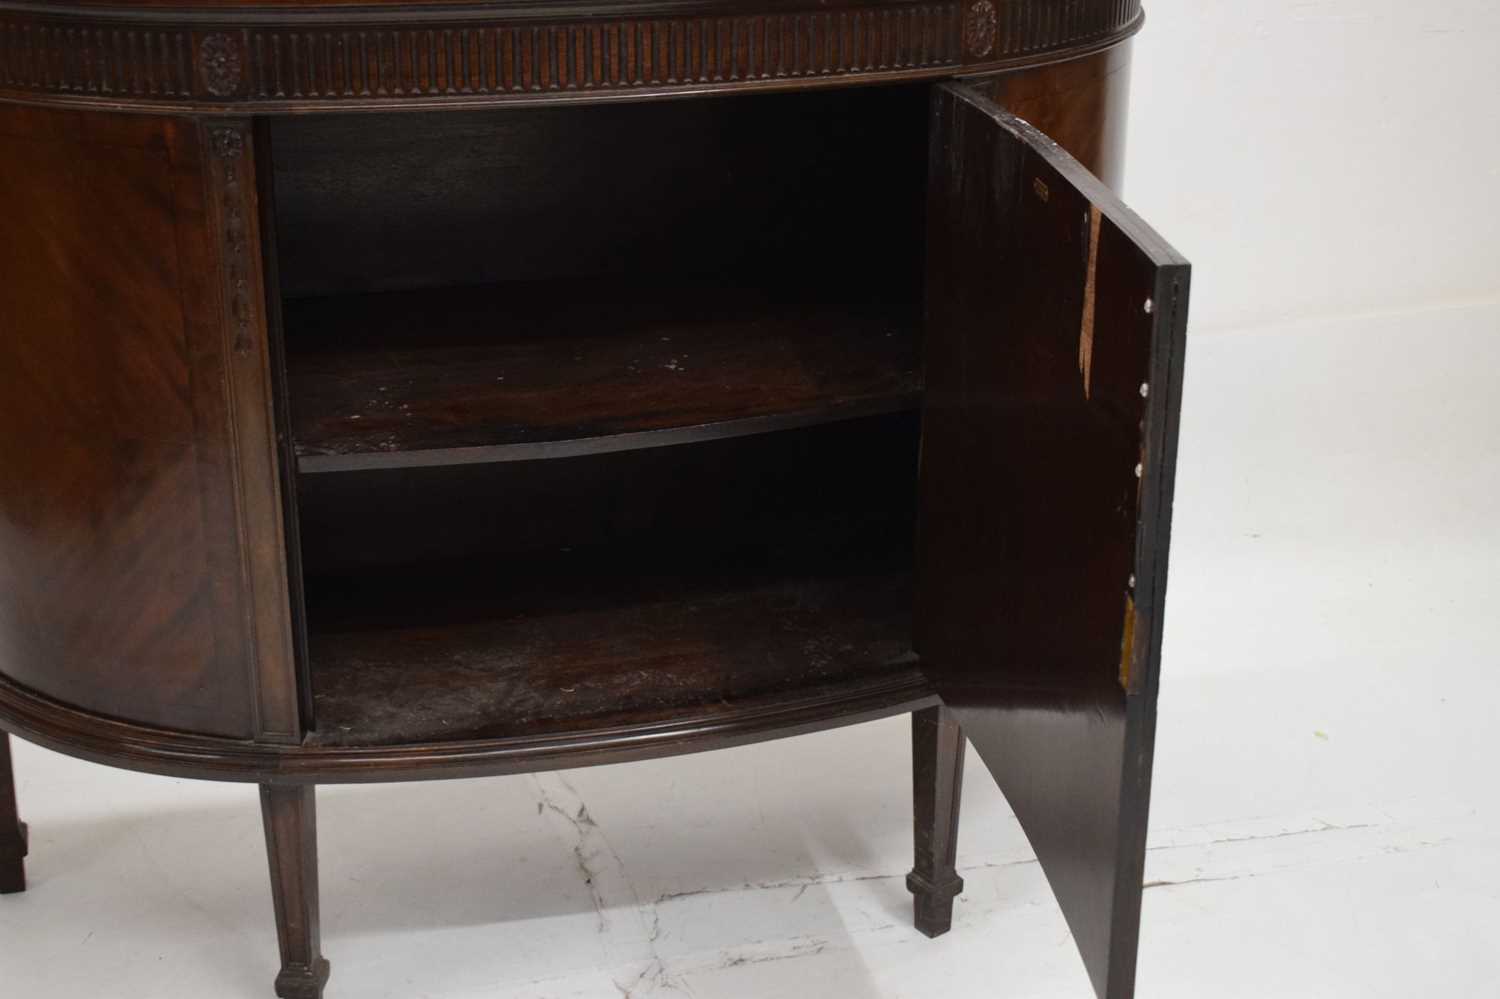 Pair of 1920s inlaid mahogany demi-lune side cabinets in the Adam Revival taste - Image 14 of 15